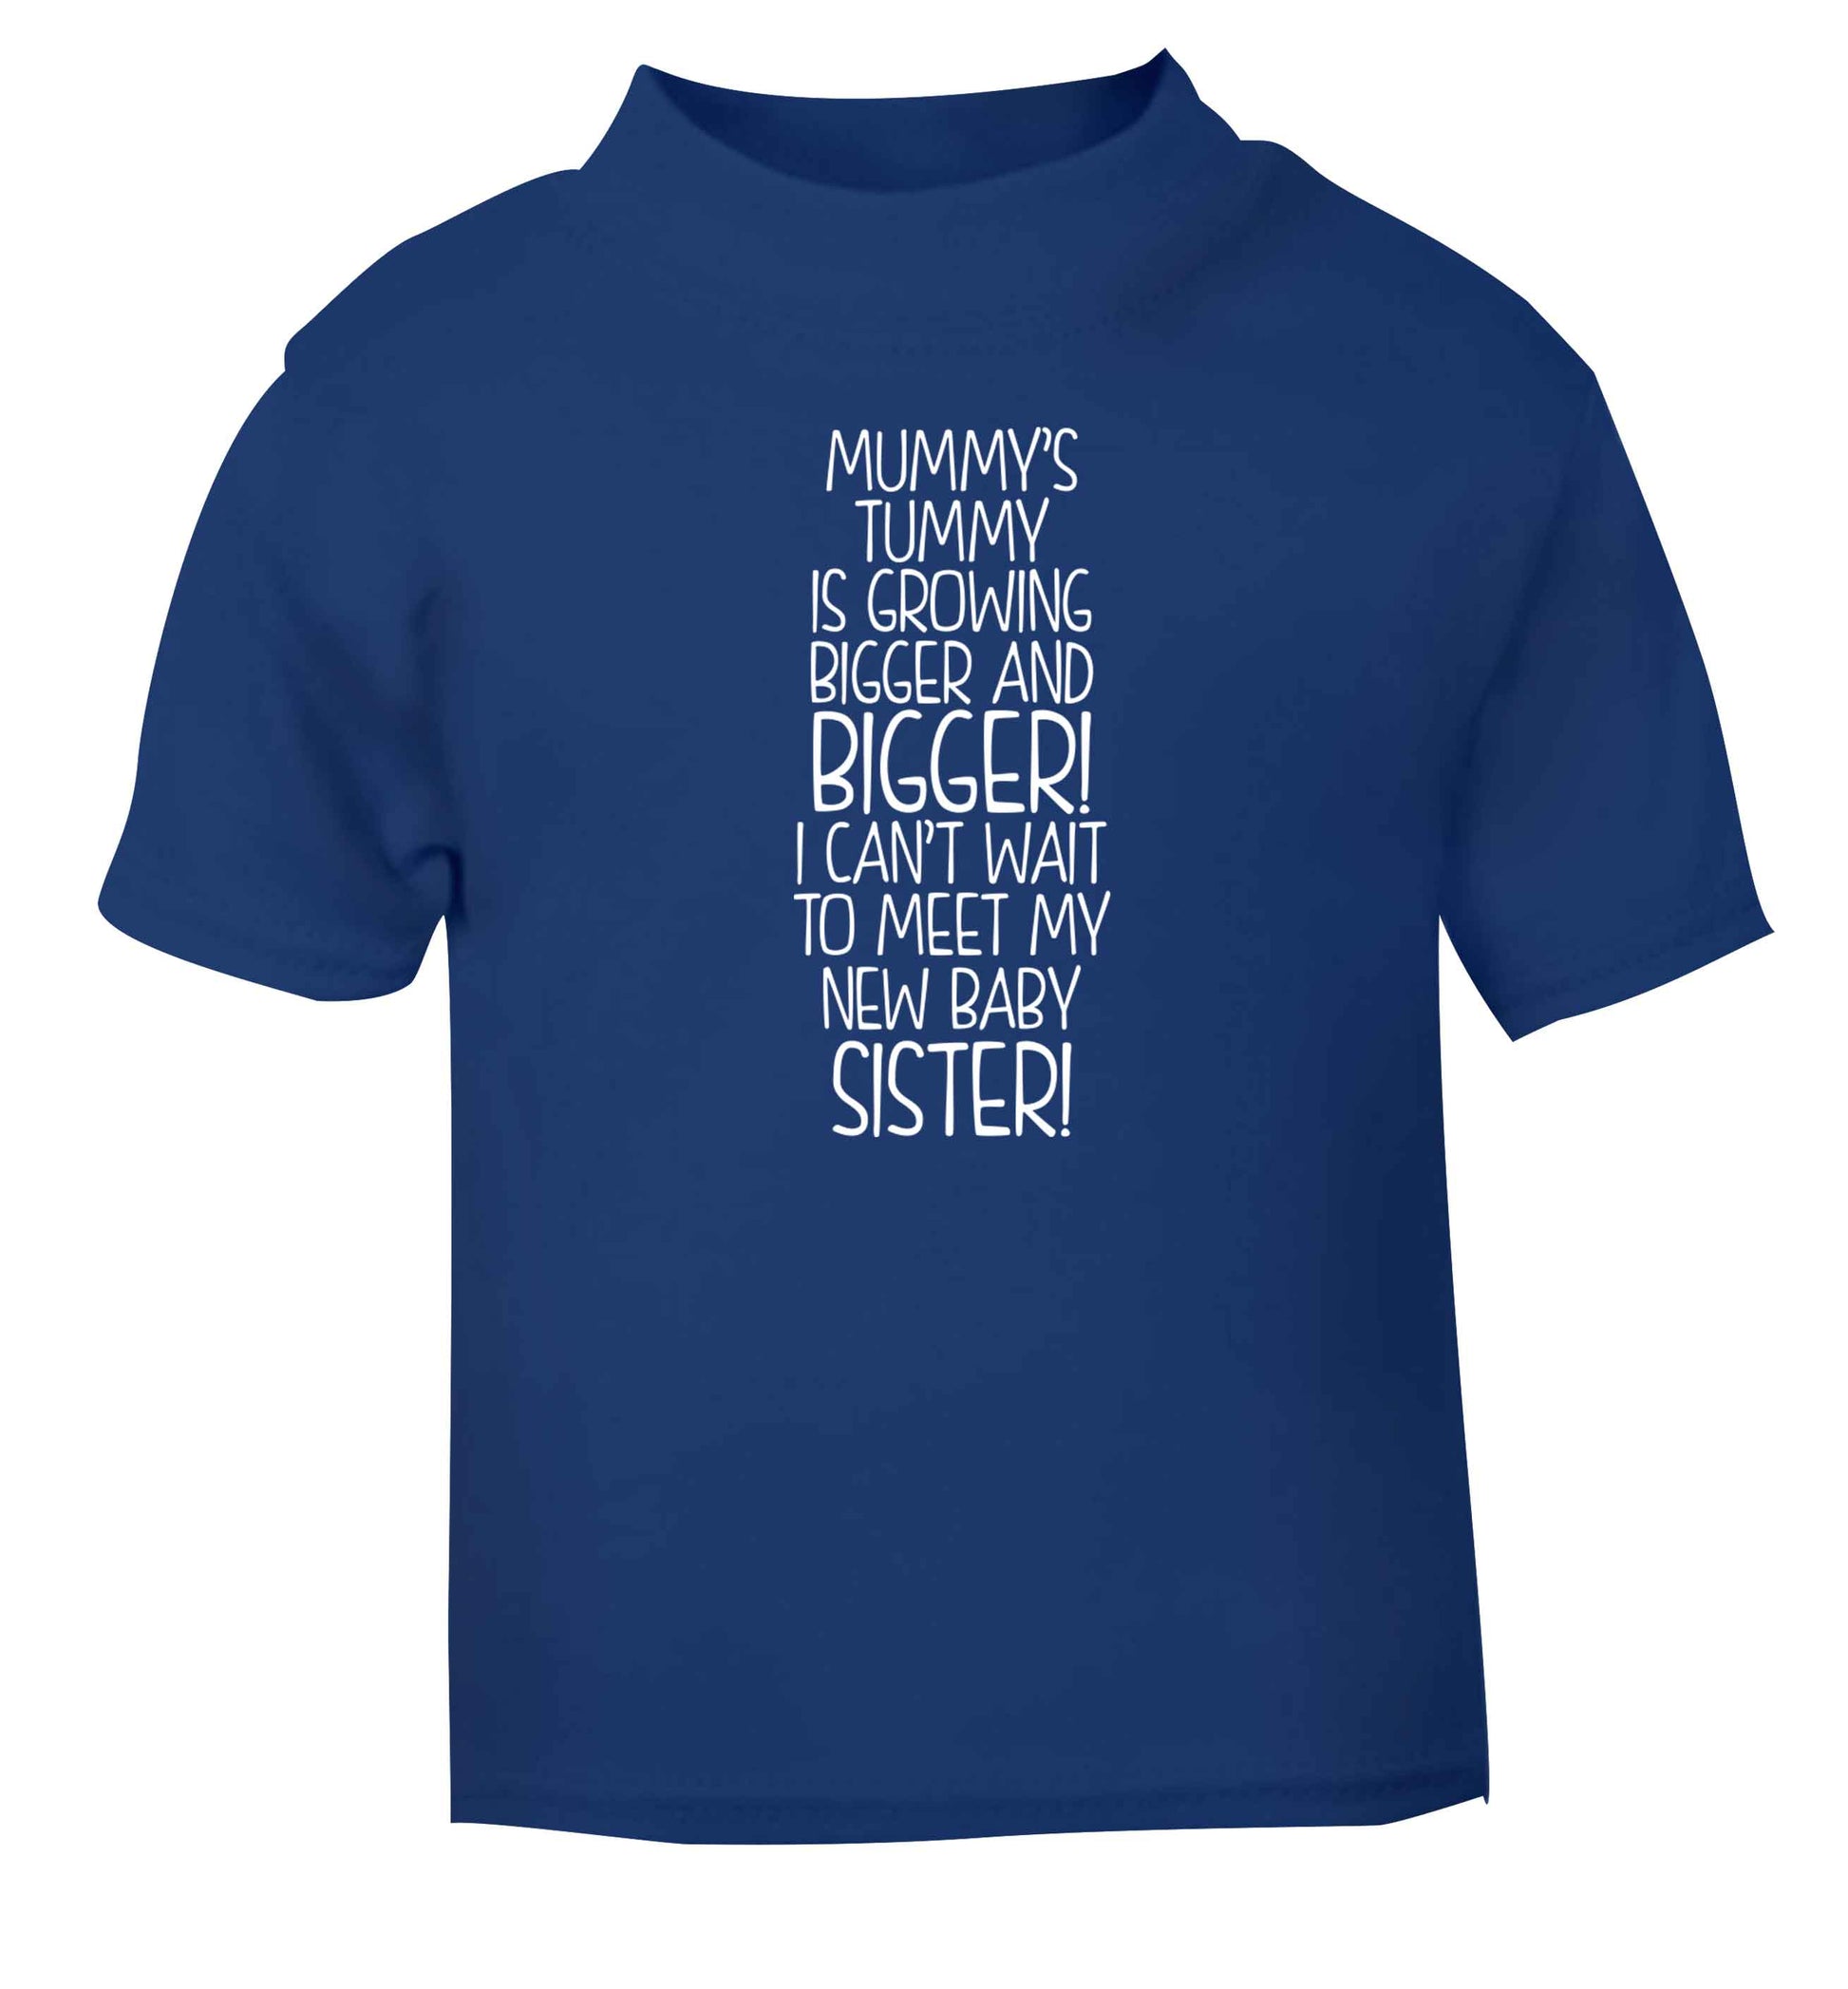 Mummy's tummy is growing bigger and bigger I can't wait to meet my new baby sister! blue Baby Toddler Tshirt 2 Years